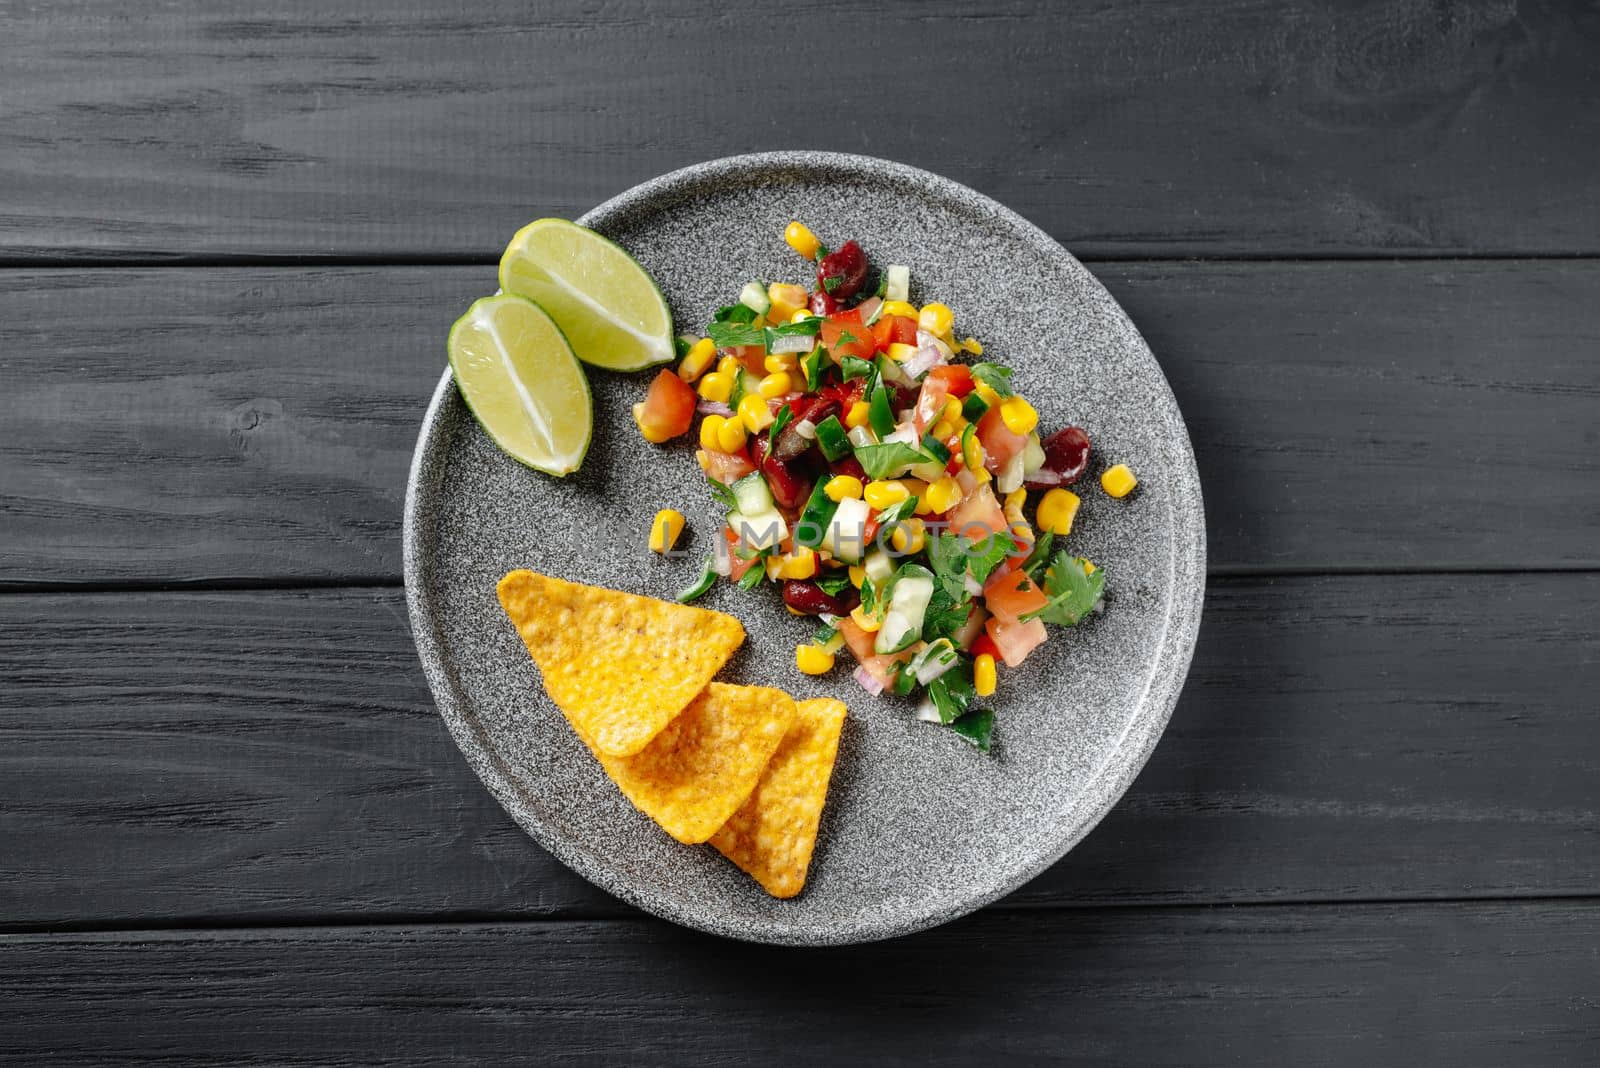 Texas caviar on a black wooden background. Top view. Texas dish with chips and nachos on a gray plate. Reducetarian, flexitarian, pescatarian eating. by gulyaevstudio